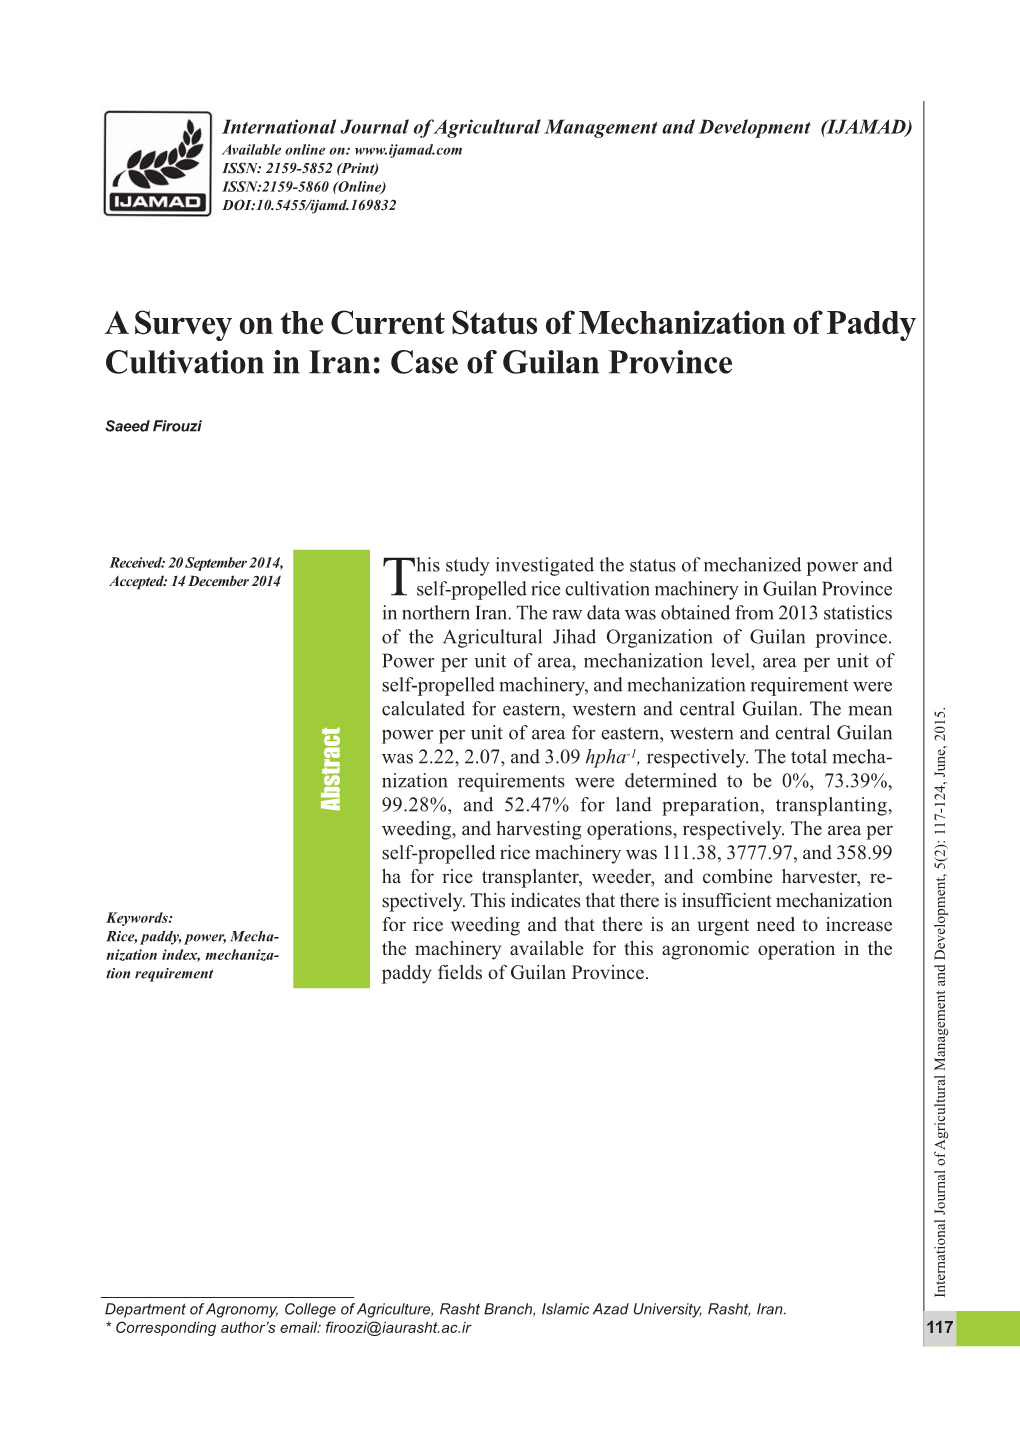 A Survey on the Current Status of Mechanization of Paddy Cultivation